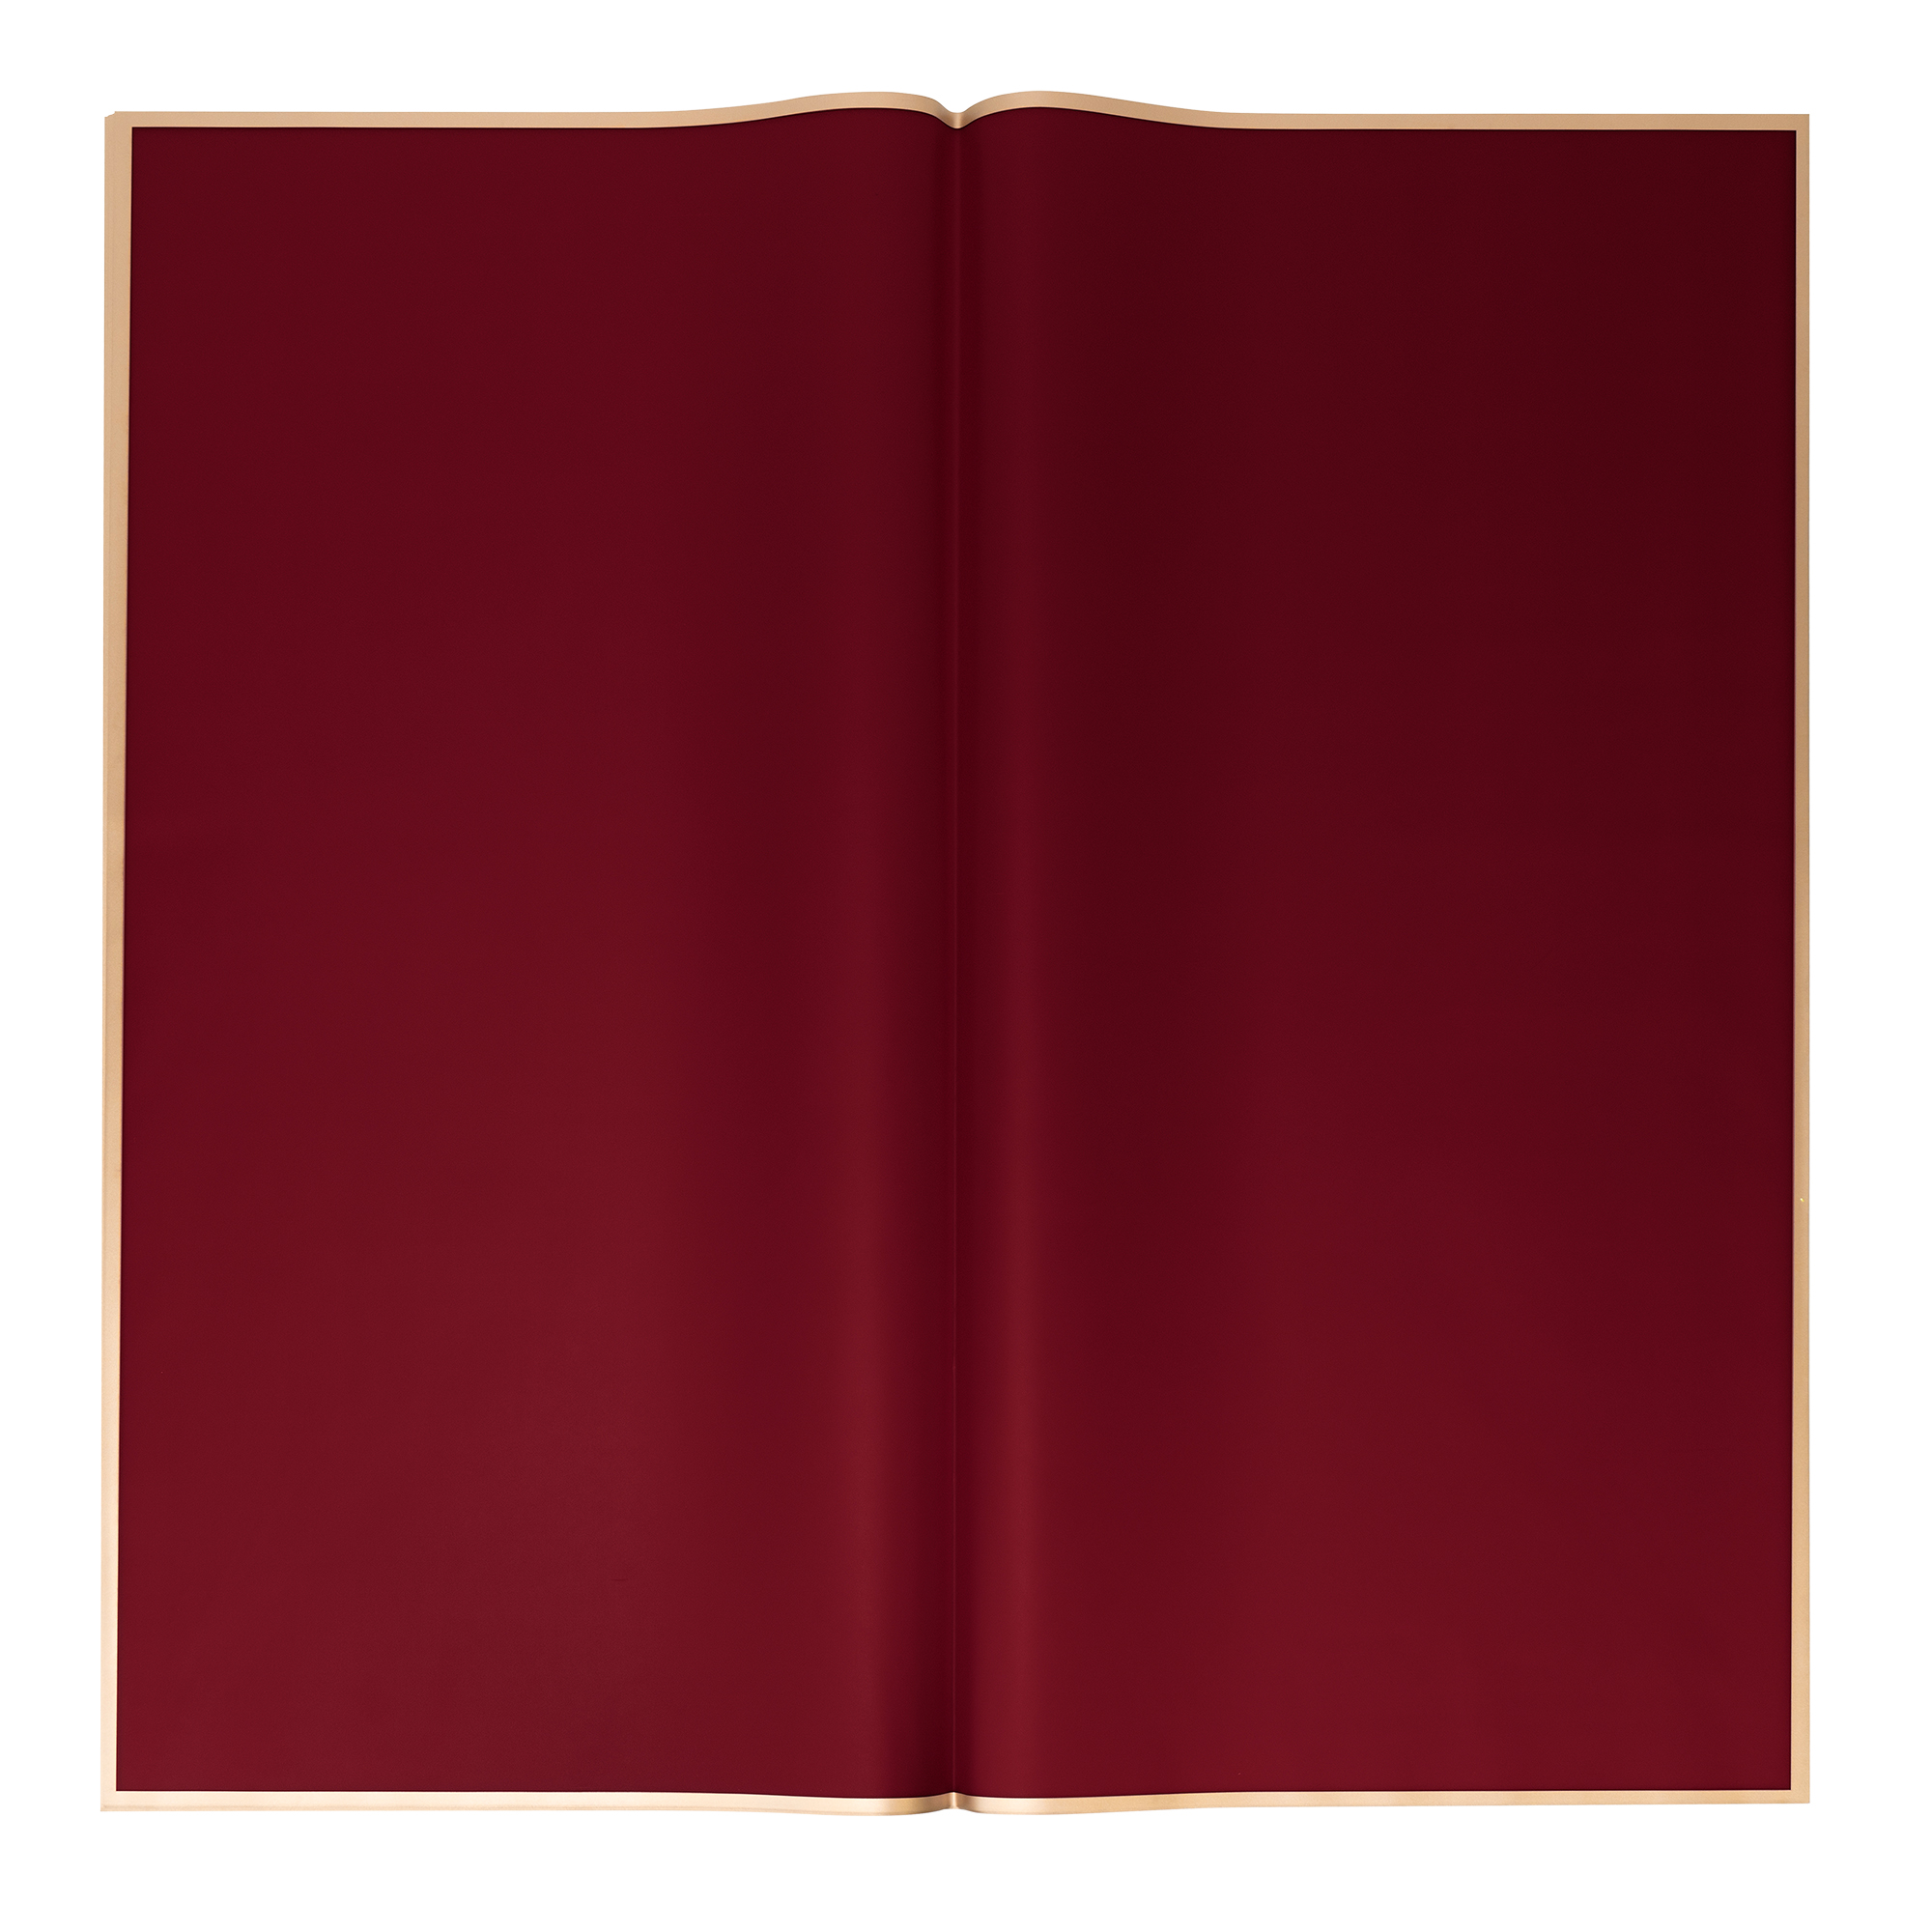 Floral Wrapping Paper With Gold Edge 20pc/pack  - Burgundy